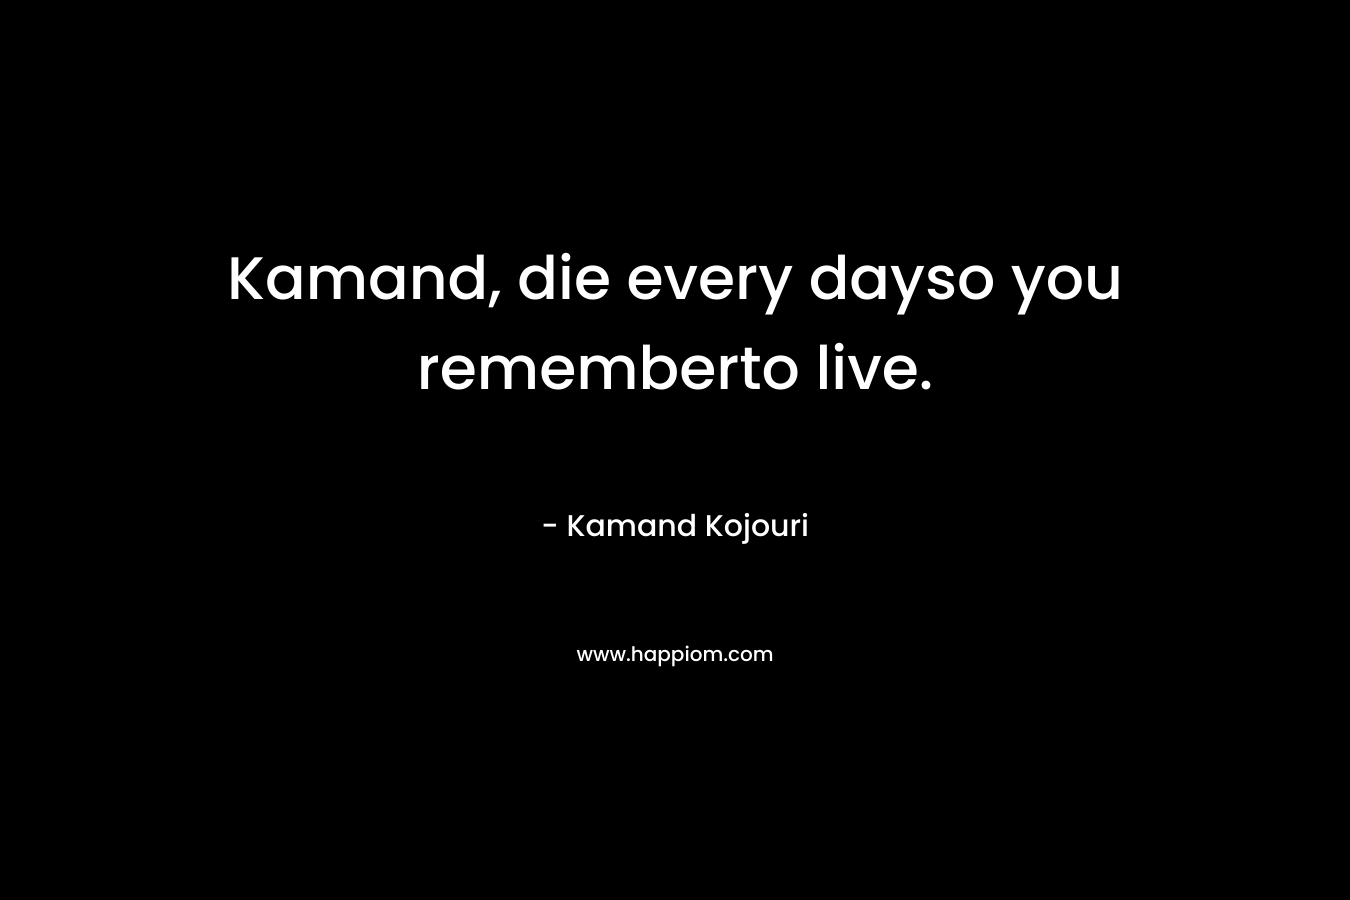 Kamand, die every dayso you rememberto live.